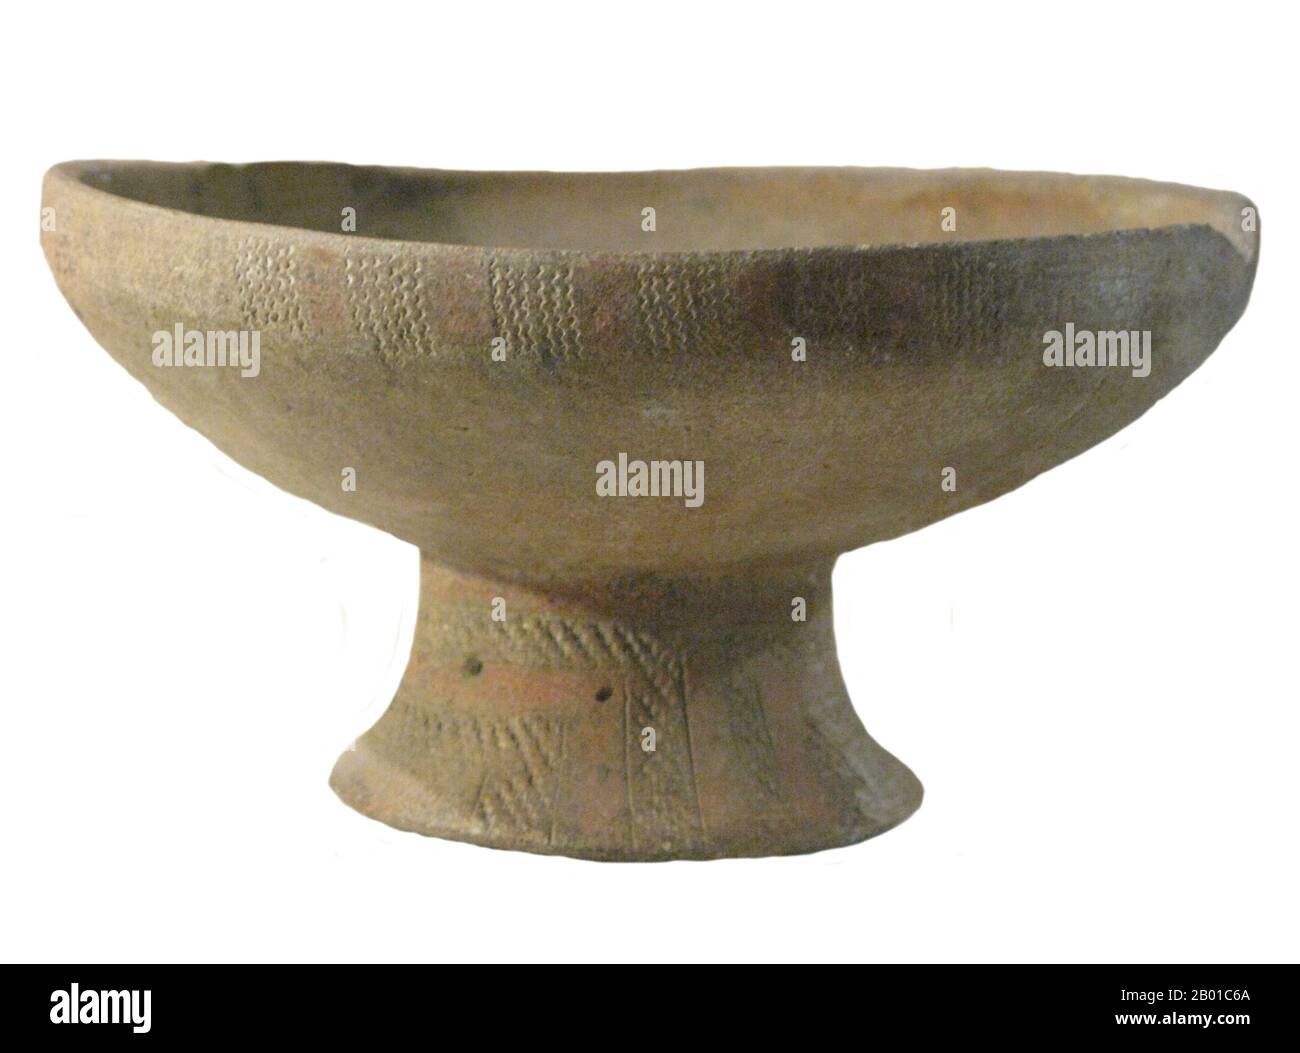 Vietnam: Pottery fruit bowl, Sa Huynh Culture, c. 1000 BCE - 200 CE.  The Sa Huỳnh culture (Vietnamese: Văn hóa Sa Huỳnh) was a culture in central and southern Vietnam that flourished between c. 1000 BCE and 200 CE. Archaeological sites from the culture have been discovered from the Mekong Delta to just south of the Tonkin region. The Sa Huynh were most likely the predecessors of the Cham people, the founders of the kingdom of Champa.  The site at Sa Huynh was discovered in 1909. Sa Huynh sites were rich in locally-worked iron artefacts, typified by axes, swords, spearheads, knives and sickles Stock Photo